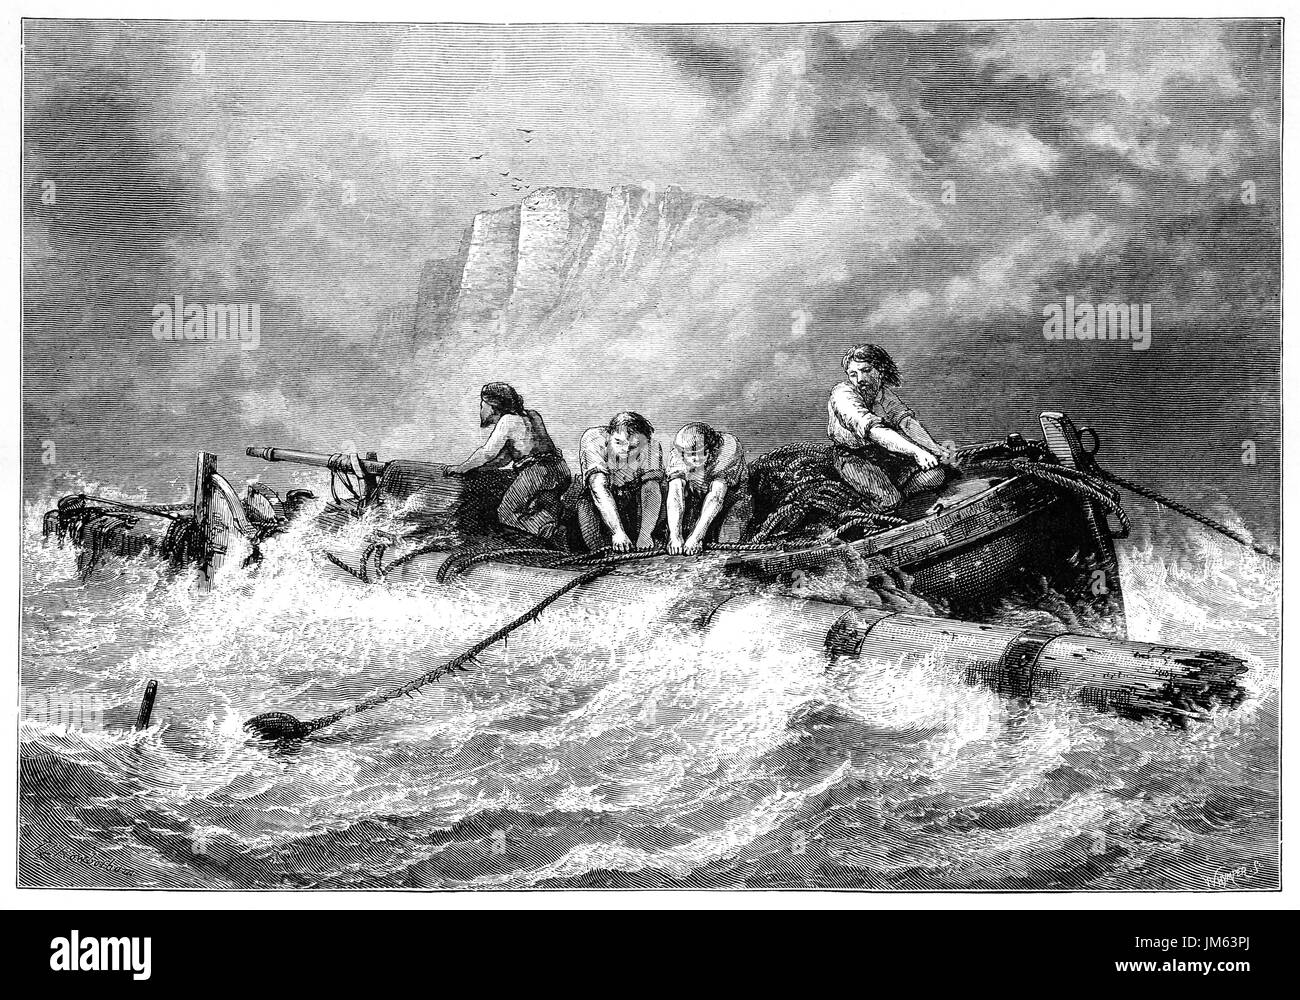 1870: Locals attending a shipwreck off Beachy Head, the highest chalk sea cliff in Britain, rising to 162 metres (531 ft) above sea level.  It is situated close to Eastbourne, East Sussex, England. Stock Photo